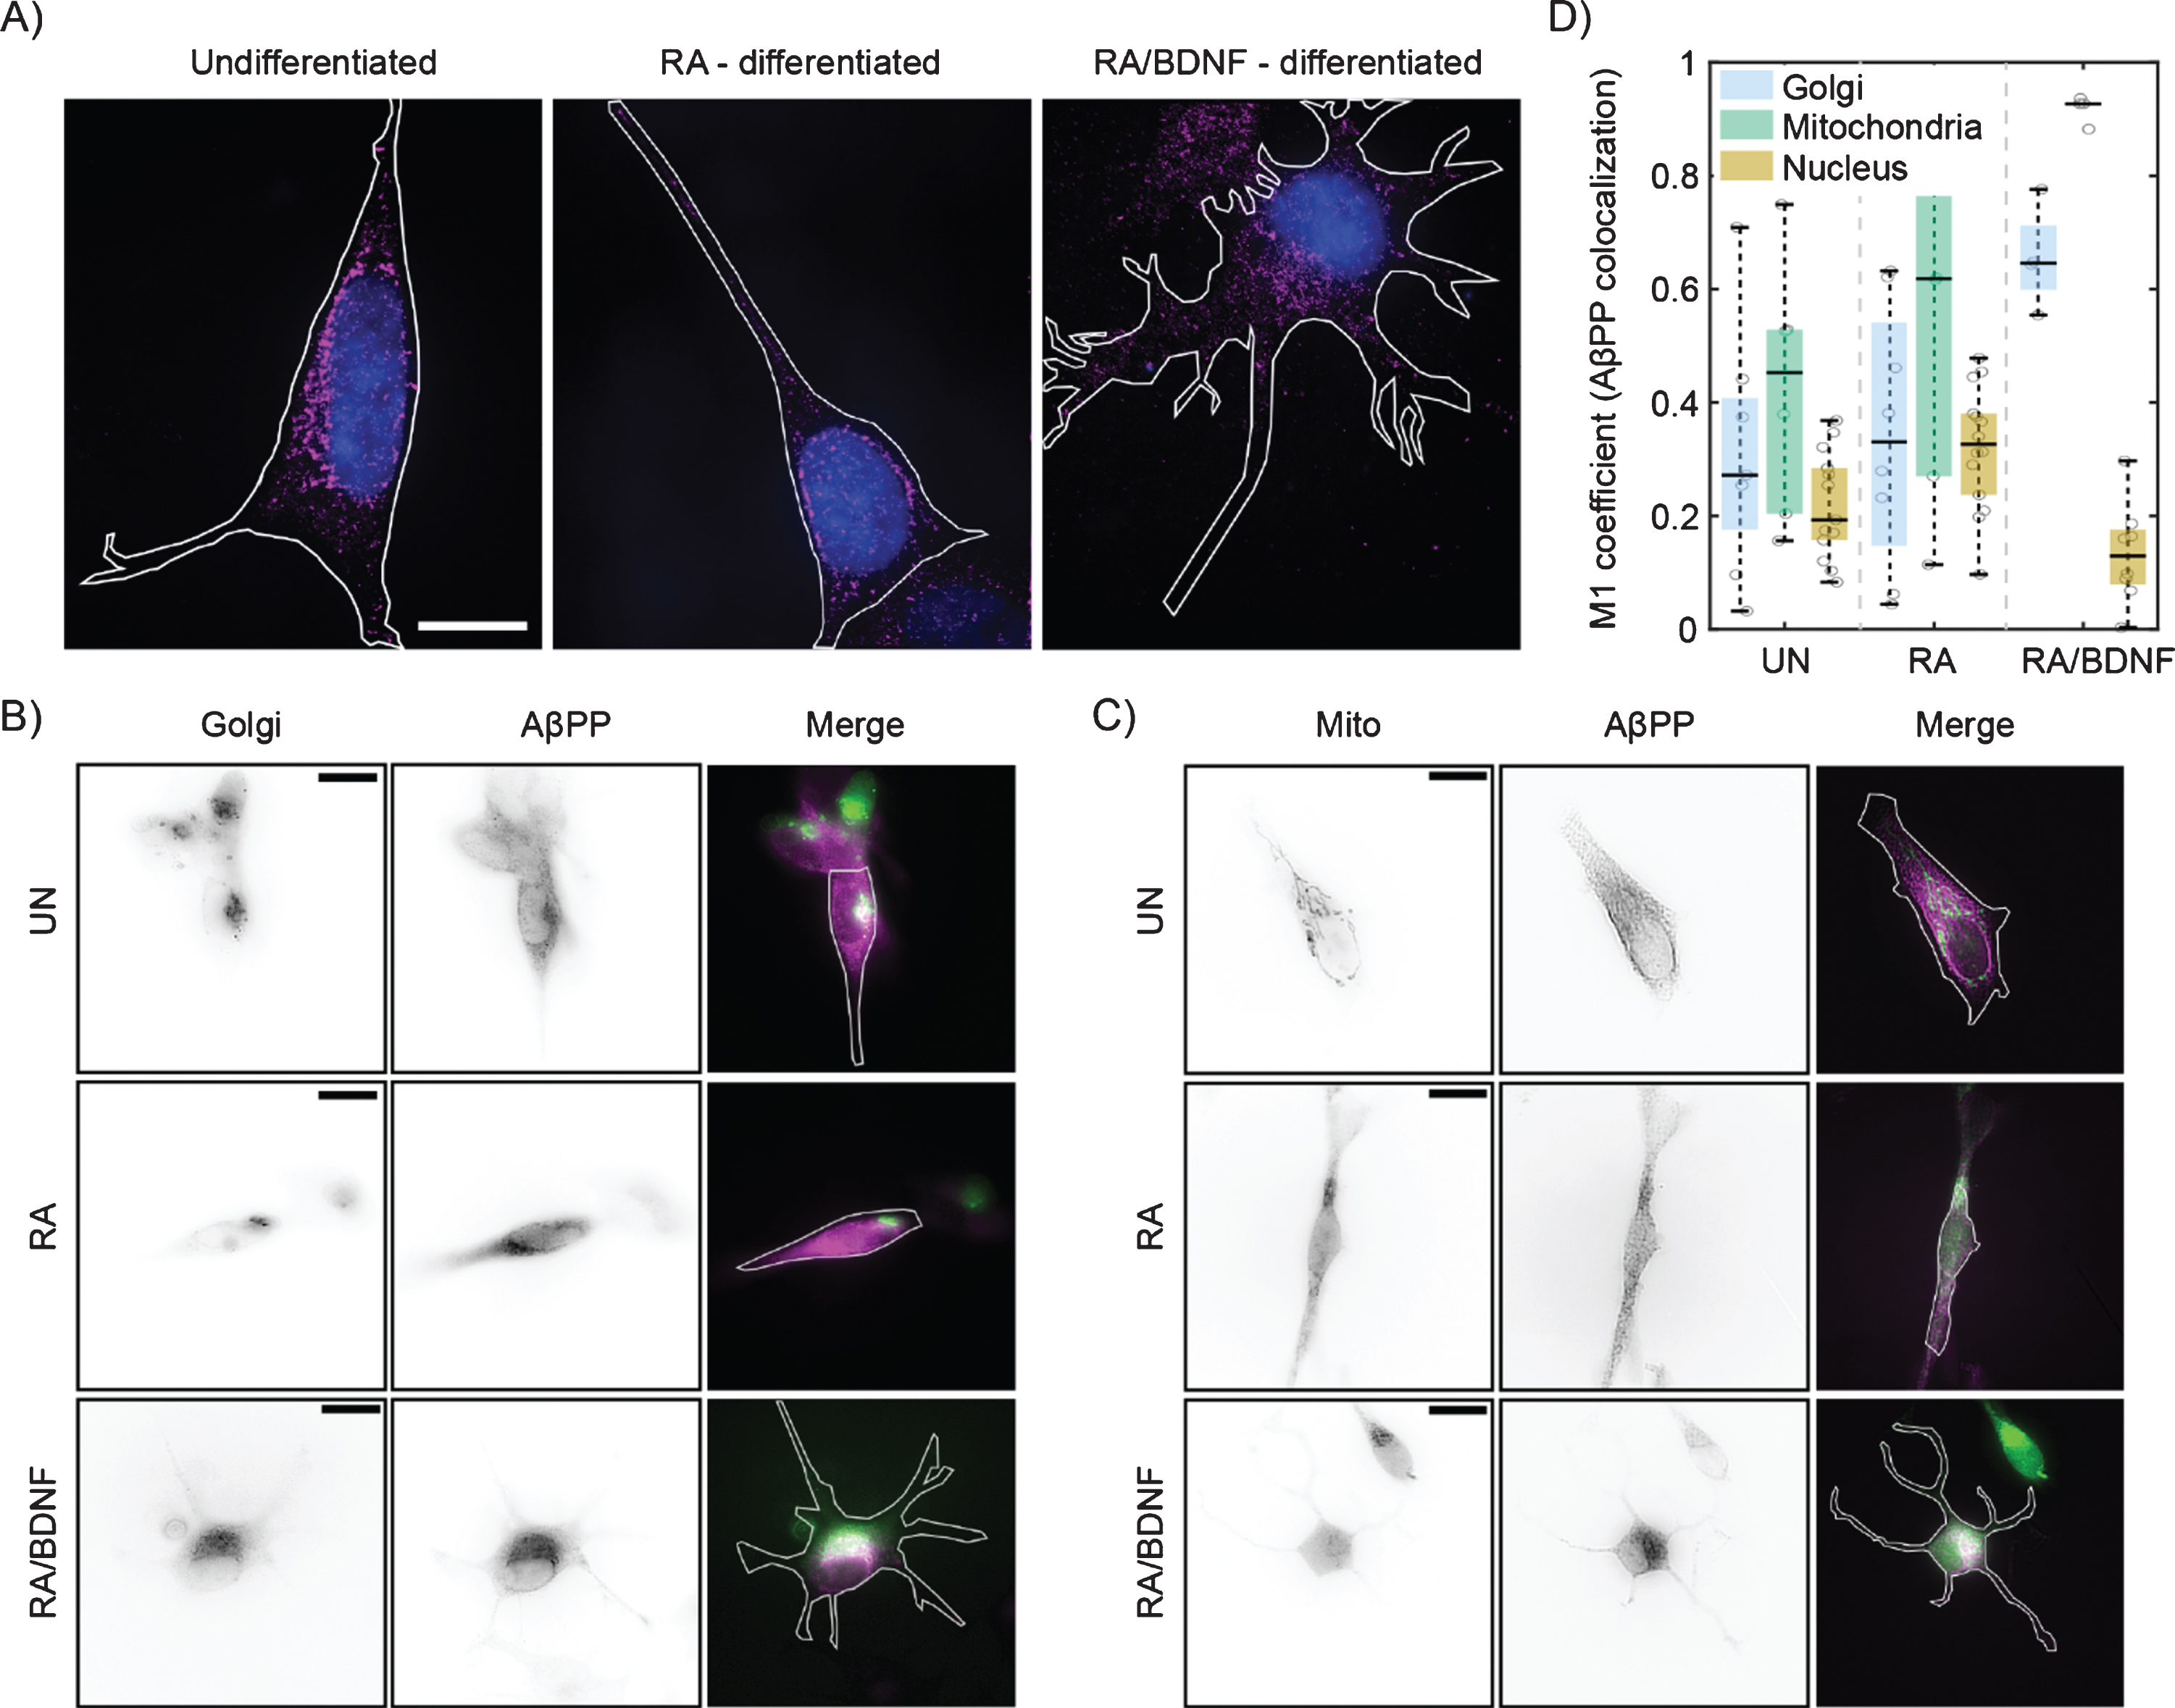 Differentiation affects the distribution of AβPP in SH-SY5Y cells. A) High-resolution AβPP localization was determined in immunolabeled (see Fig. 1), undifferentiated (left), RA differentiated (middle), and RA/BDNF differentiated (right) SH-SY5Y cells using super-resolution method –single molecule localization microscopy. N-terminal part of AβPP –magenta, nucleus –blue, cell contour –white line. The scale bar represents 10μm. B, C) Two-channel, wide-field images of AβPP in fixed SH-SY5Y cells. Green color in merged images corresponds to the Golgi (B)/Mitochondria (C) markers, magenta –N-terminal part of AβPP. The white contour shows the edge of the cell. UN, undifferentiated cells; RA, cells differentiated with retinoic acid; RA/BDNF, cells differentiated with RA and BDNF. Scale bars, 10μm. D) AβPP colocalization with Golgi apparatus, mitochondria and nucleus characterized as the M1 values using JACoP algorithms (for details, see Methods). The values were calculated from at least four independent experiments.